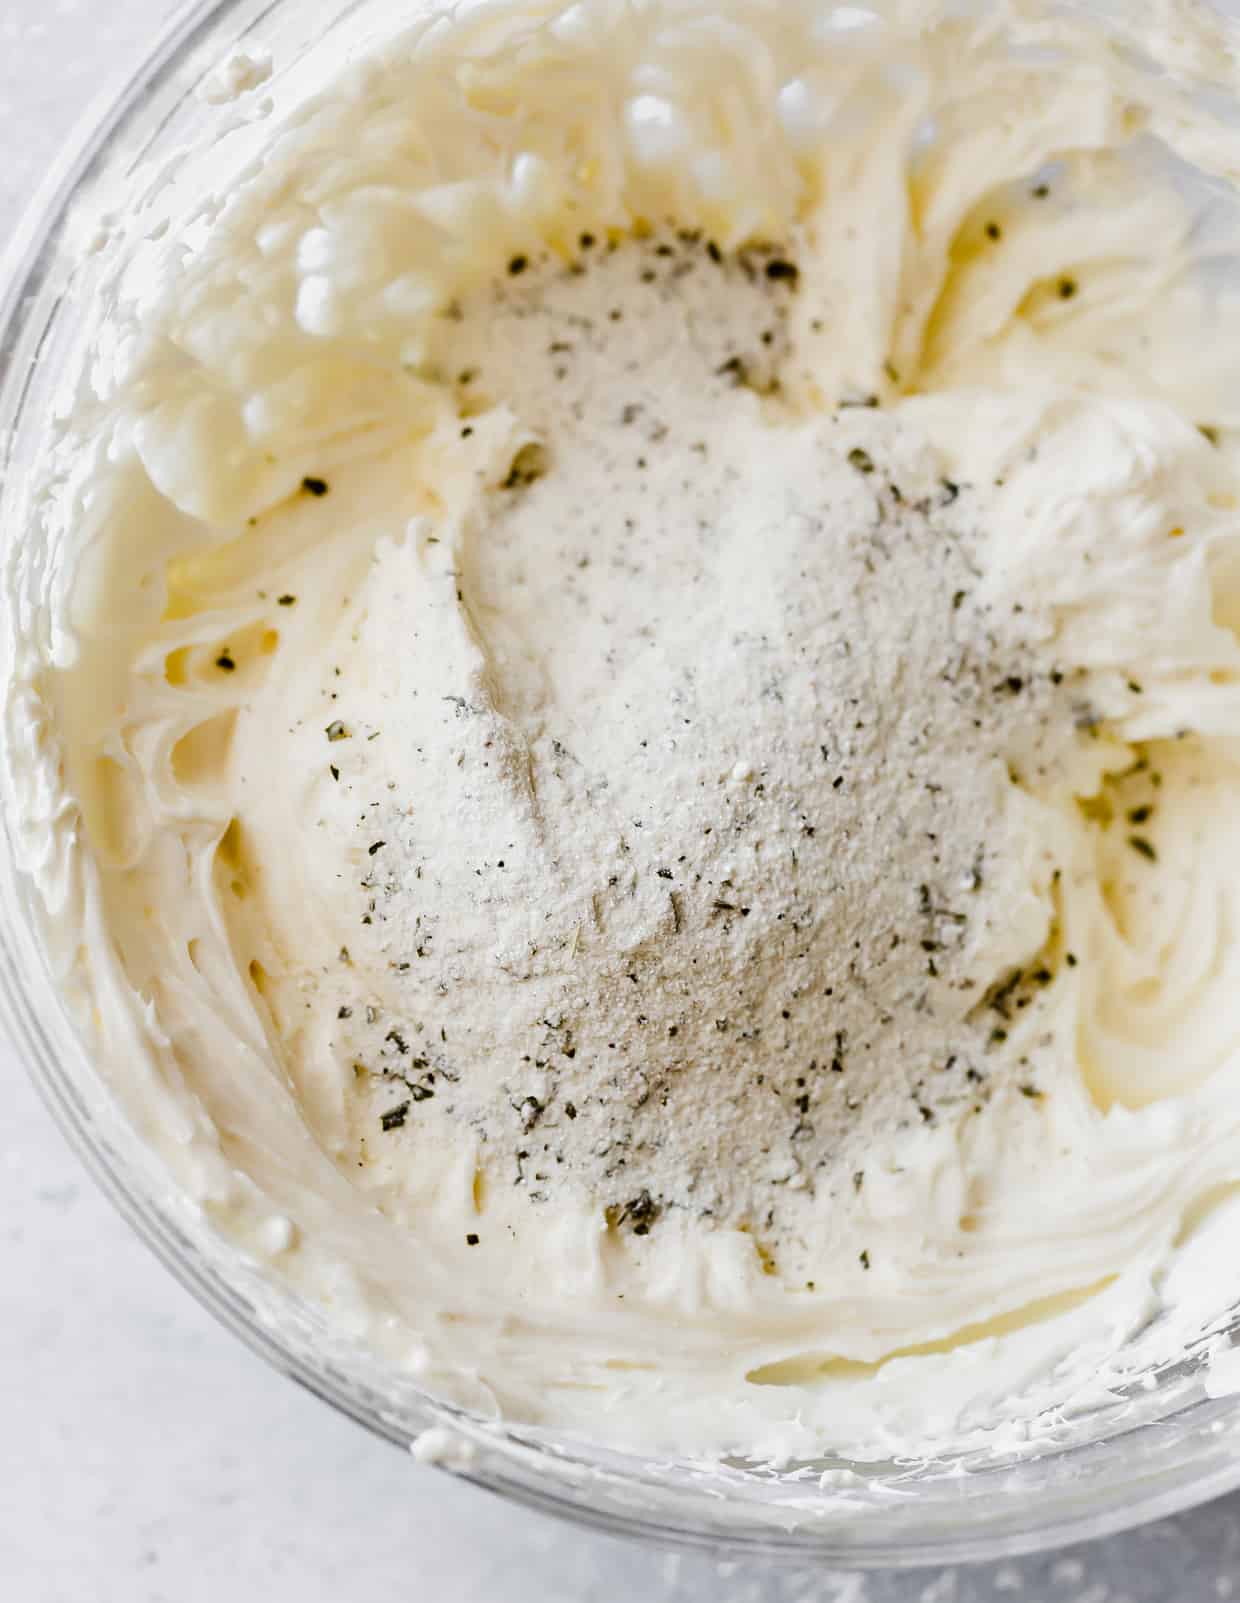 Dried ranch seasoning mix atop a cream cheese and mayonnaise mixture in a bowl.